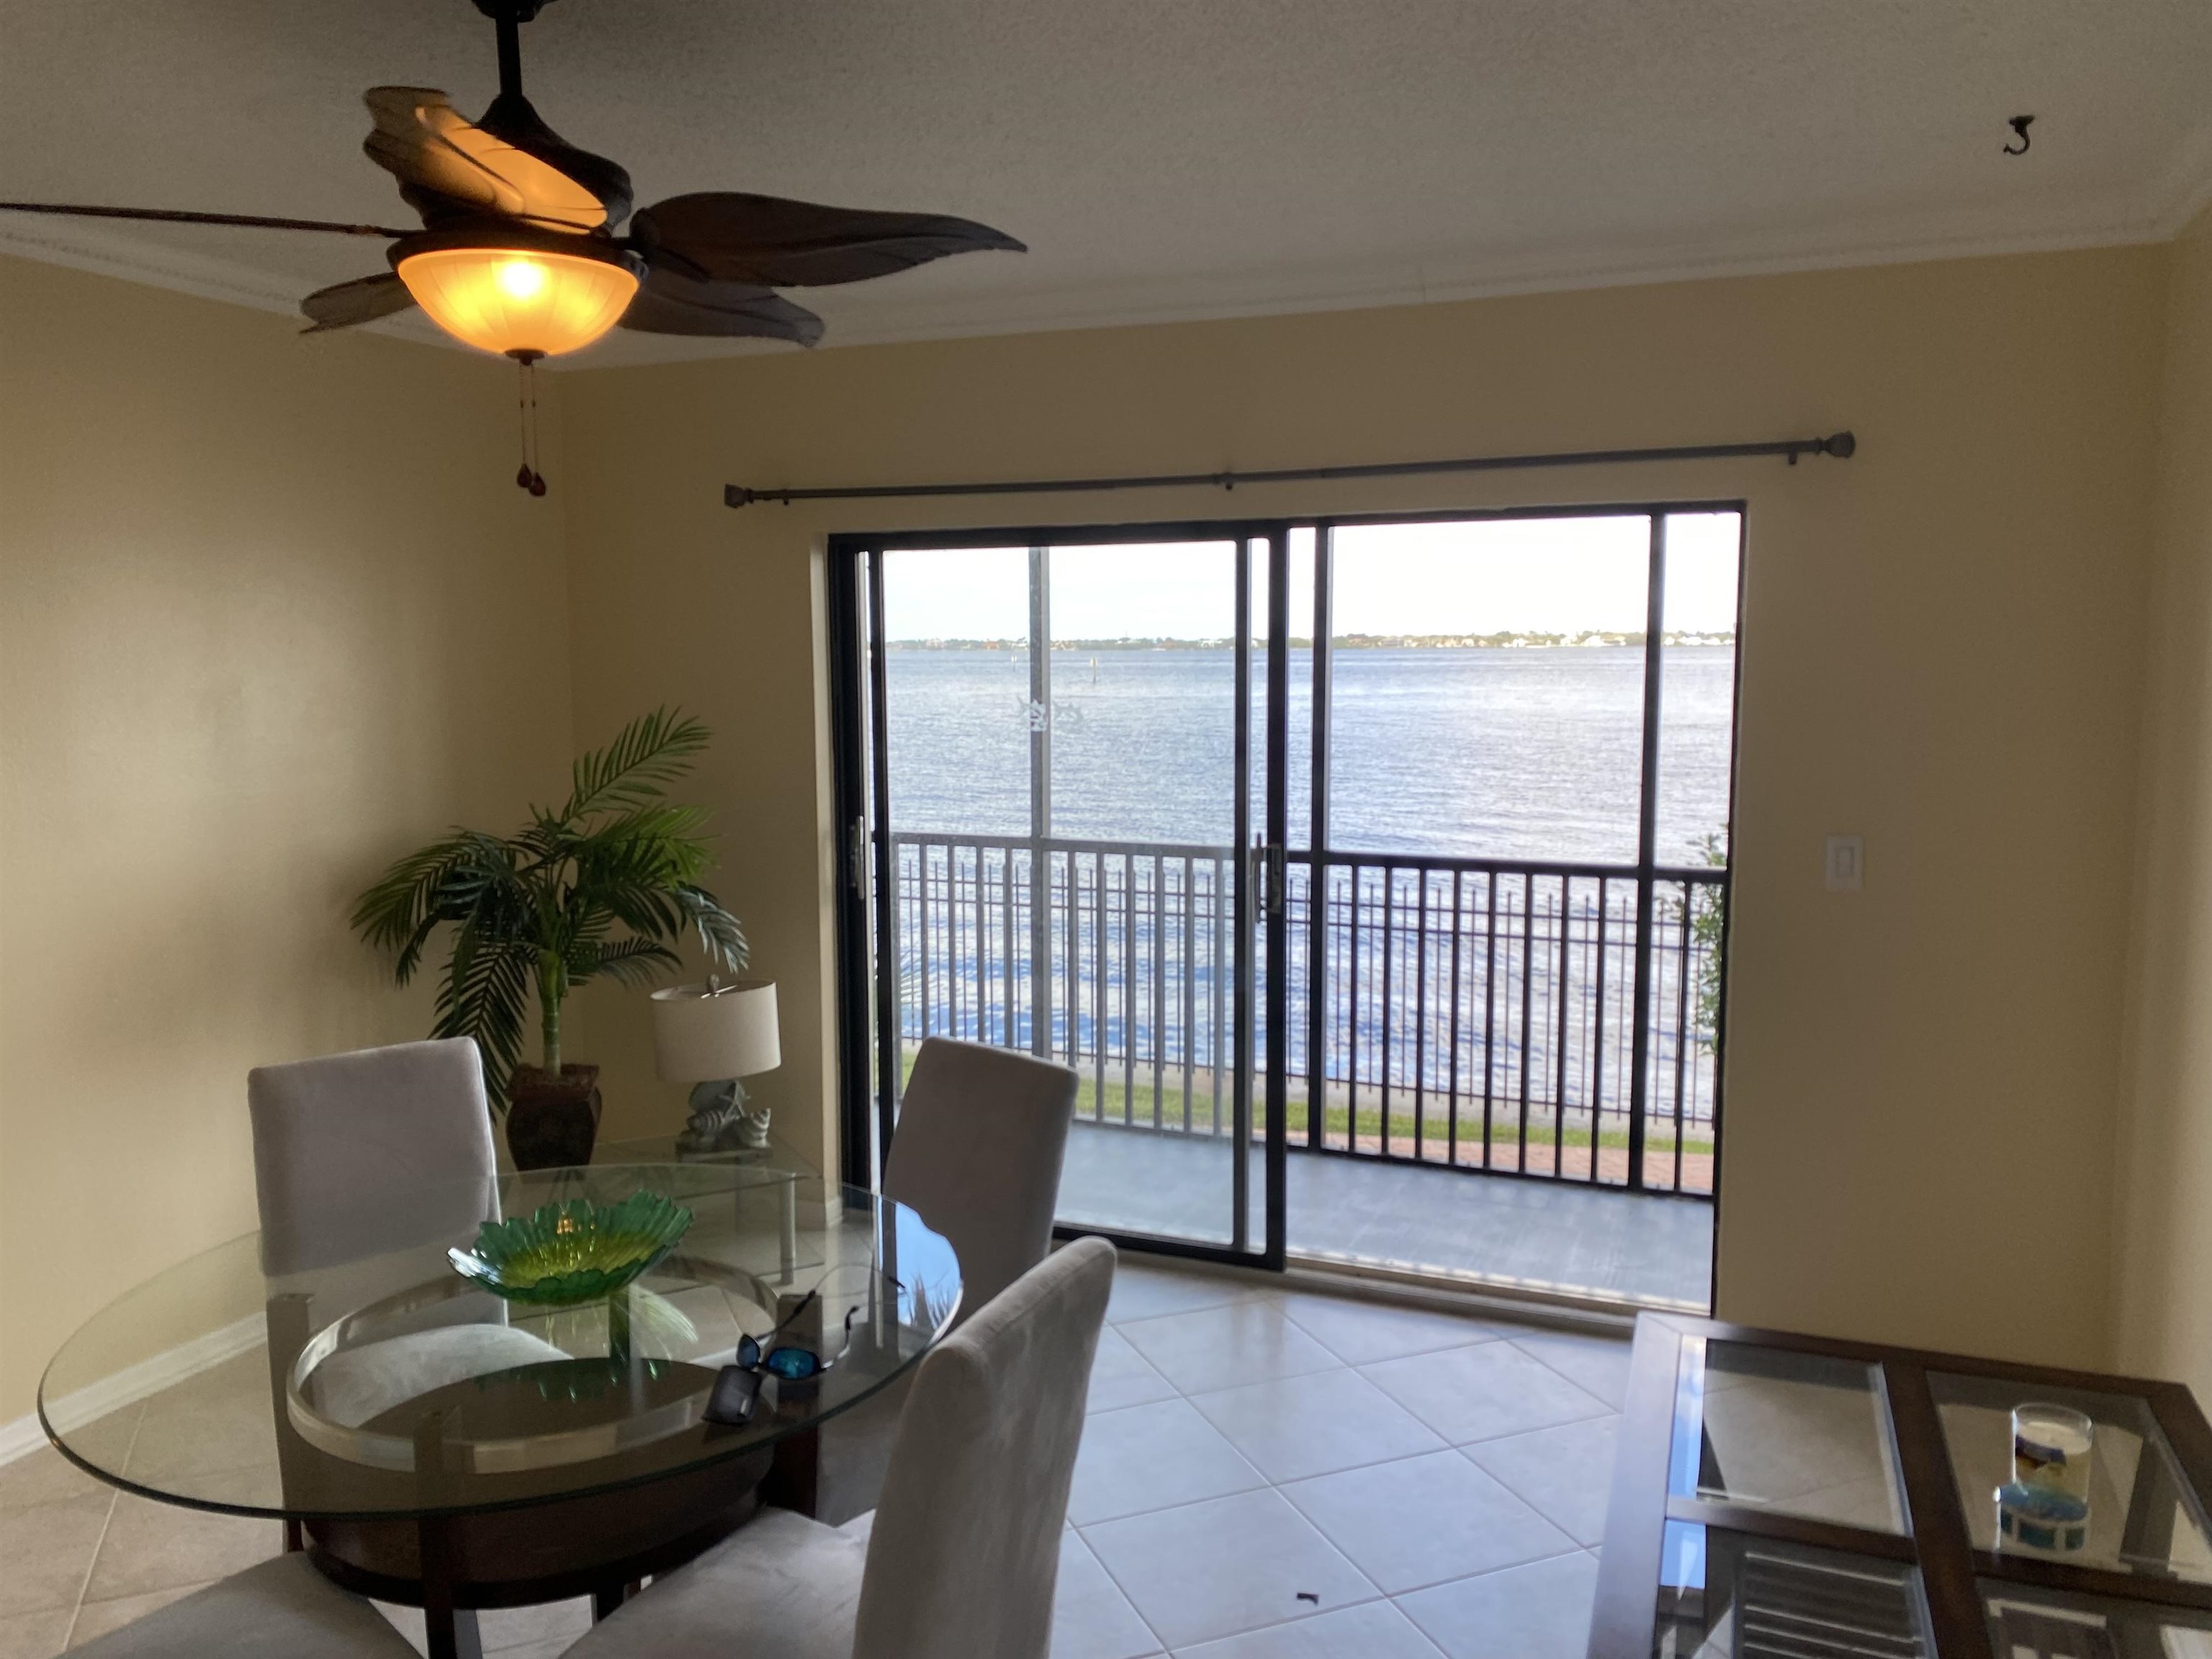 1900 Virginia Ave, Fort Myers, Florida 33901, 1 Bedroom Bedrooms, ,1 BathroomBathrooms,Condo,For Sale,Virginia Ave,2230234